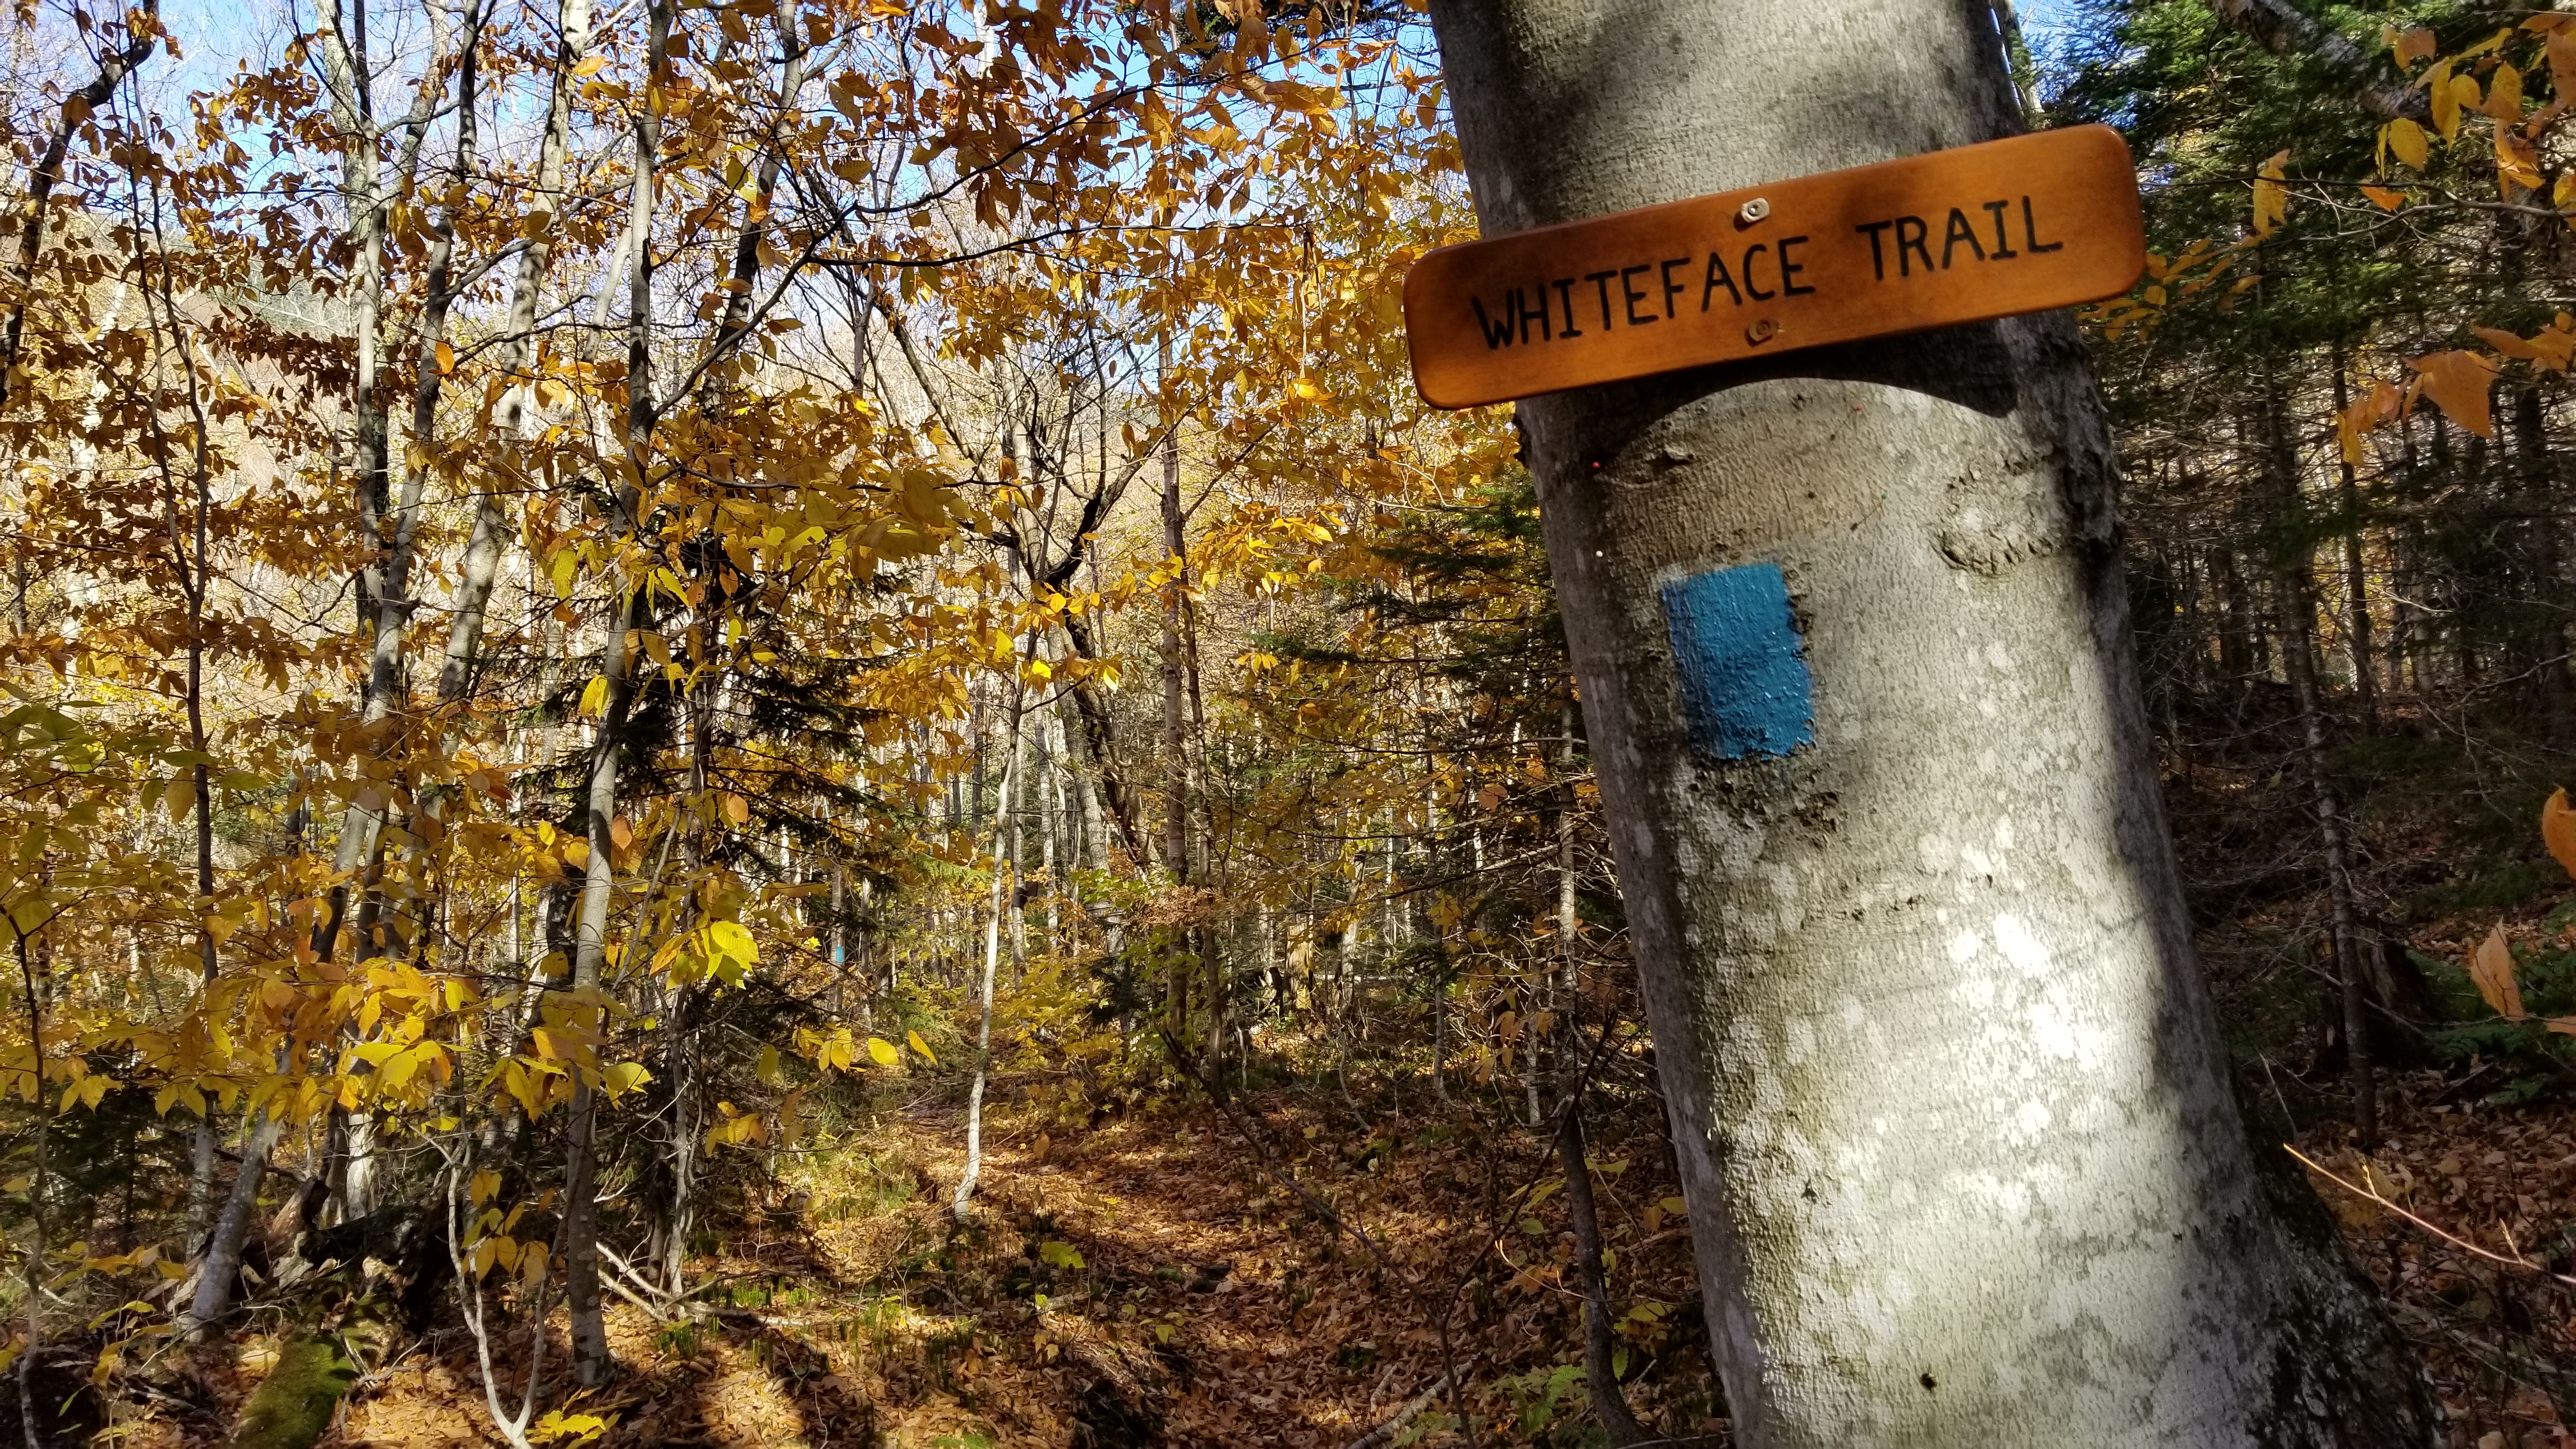 Whiteface Trail